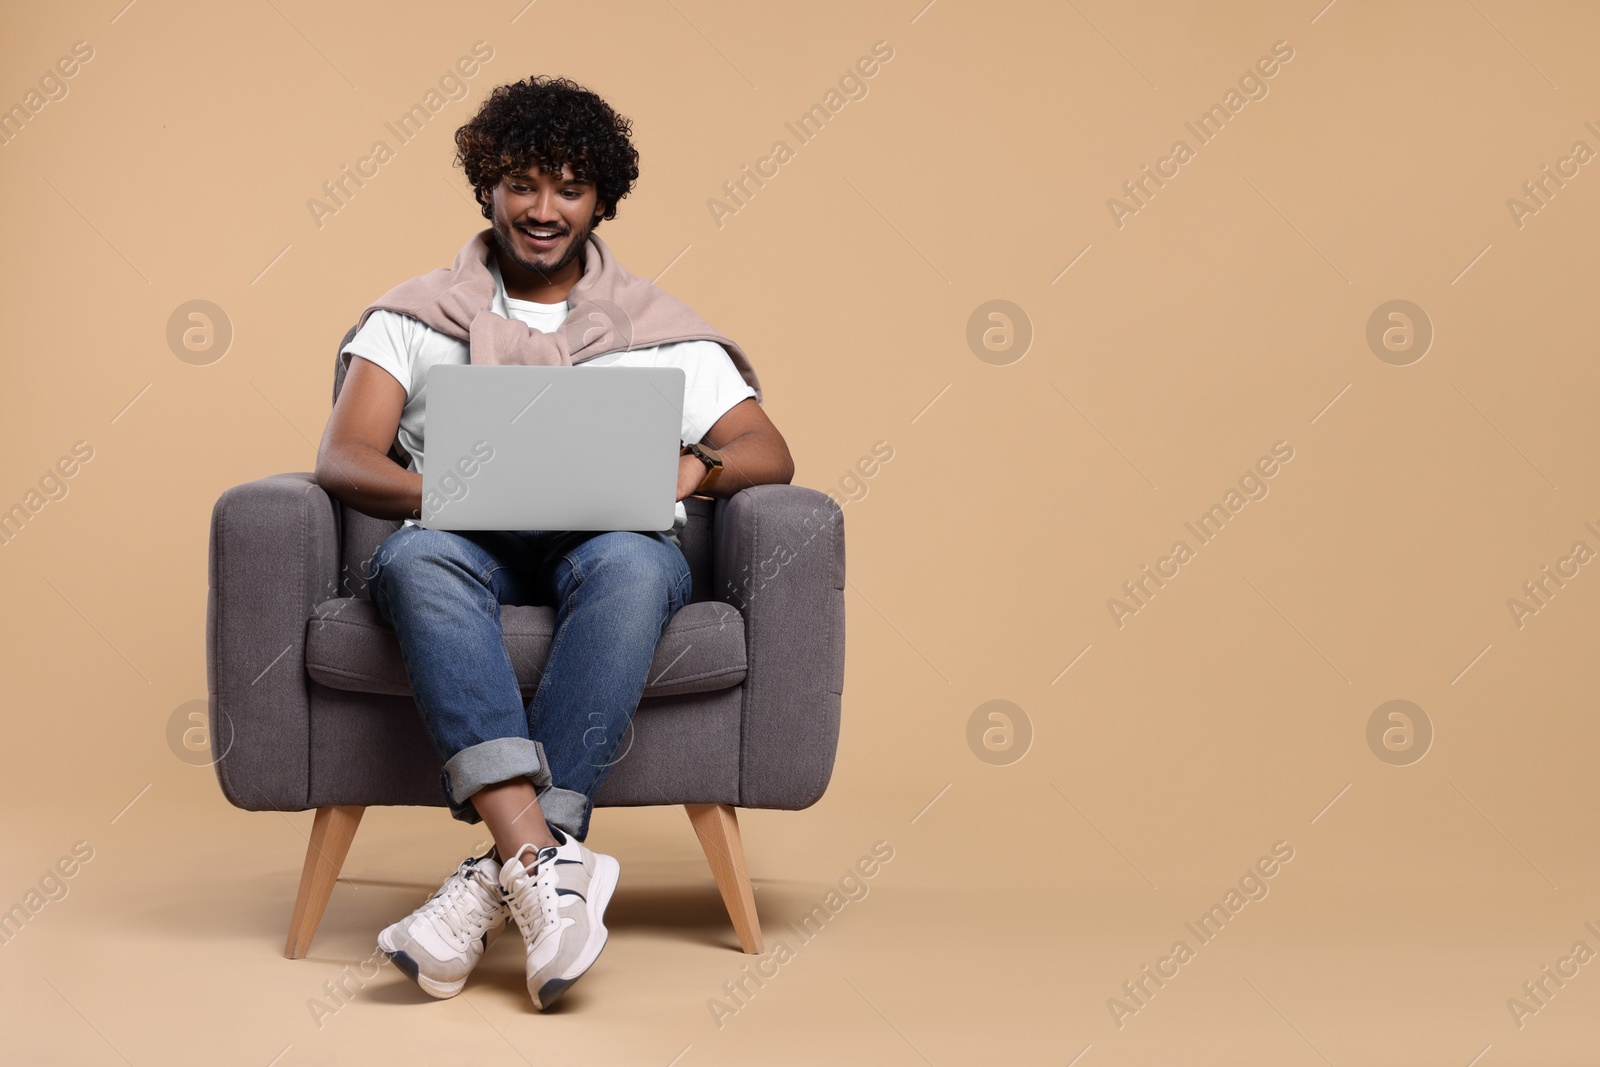 Photo of Smiling man with laptop sitting in armchair on beige background. Space for text